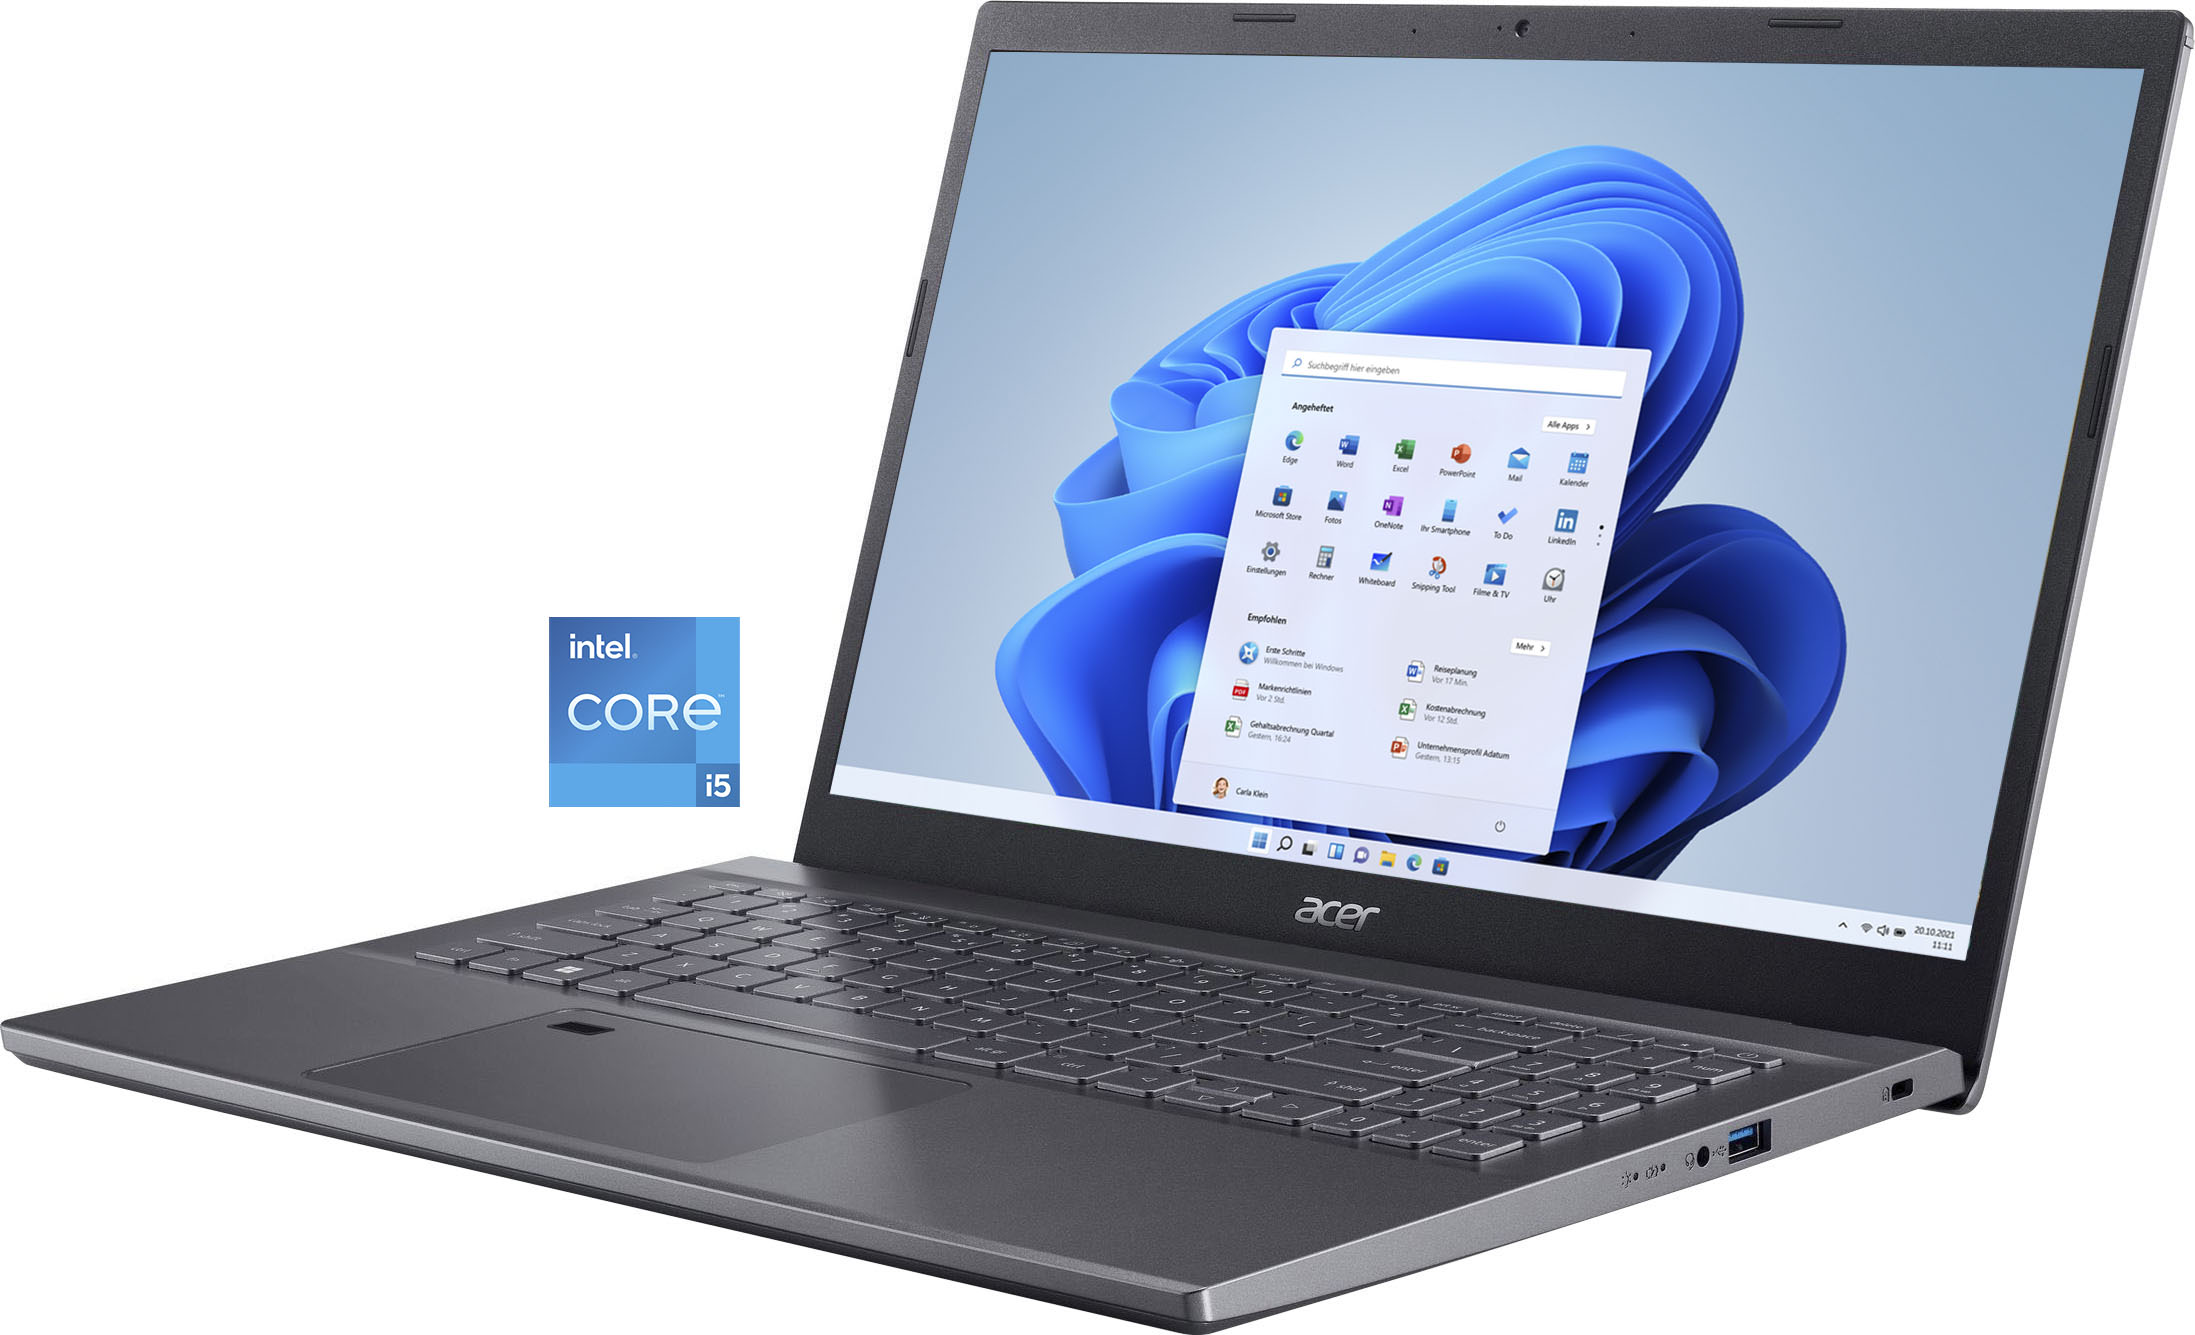 Acer Notebook cm, 39,62 jetzt Graphics, Core 15,6 GB bei OTTO »A515-57-53QH«, UHD / Intel, 512 i5, SSD Zoll